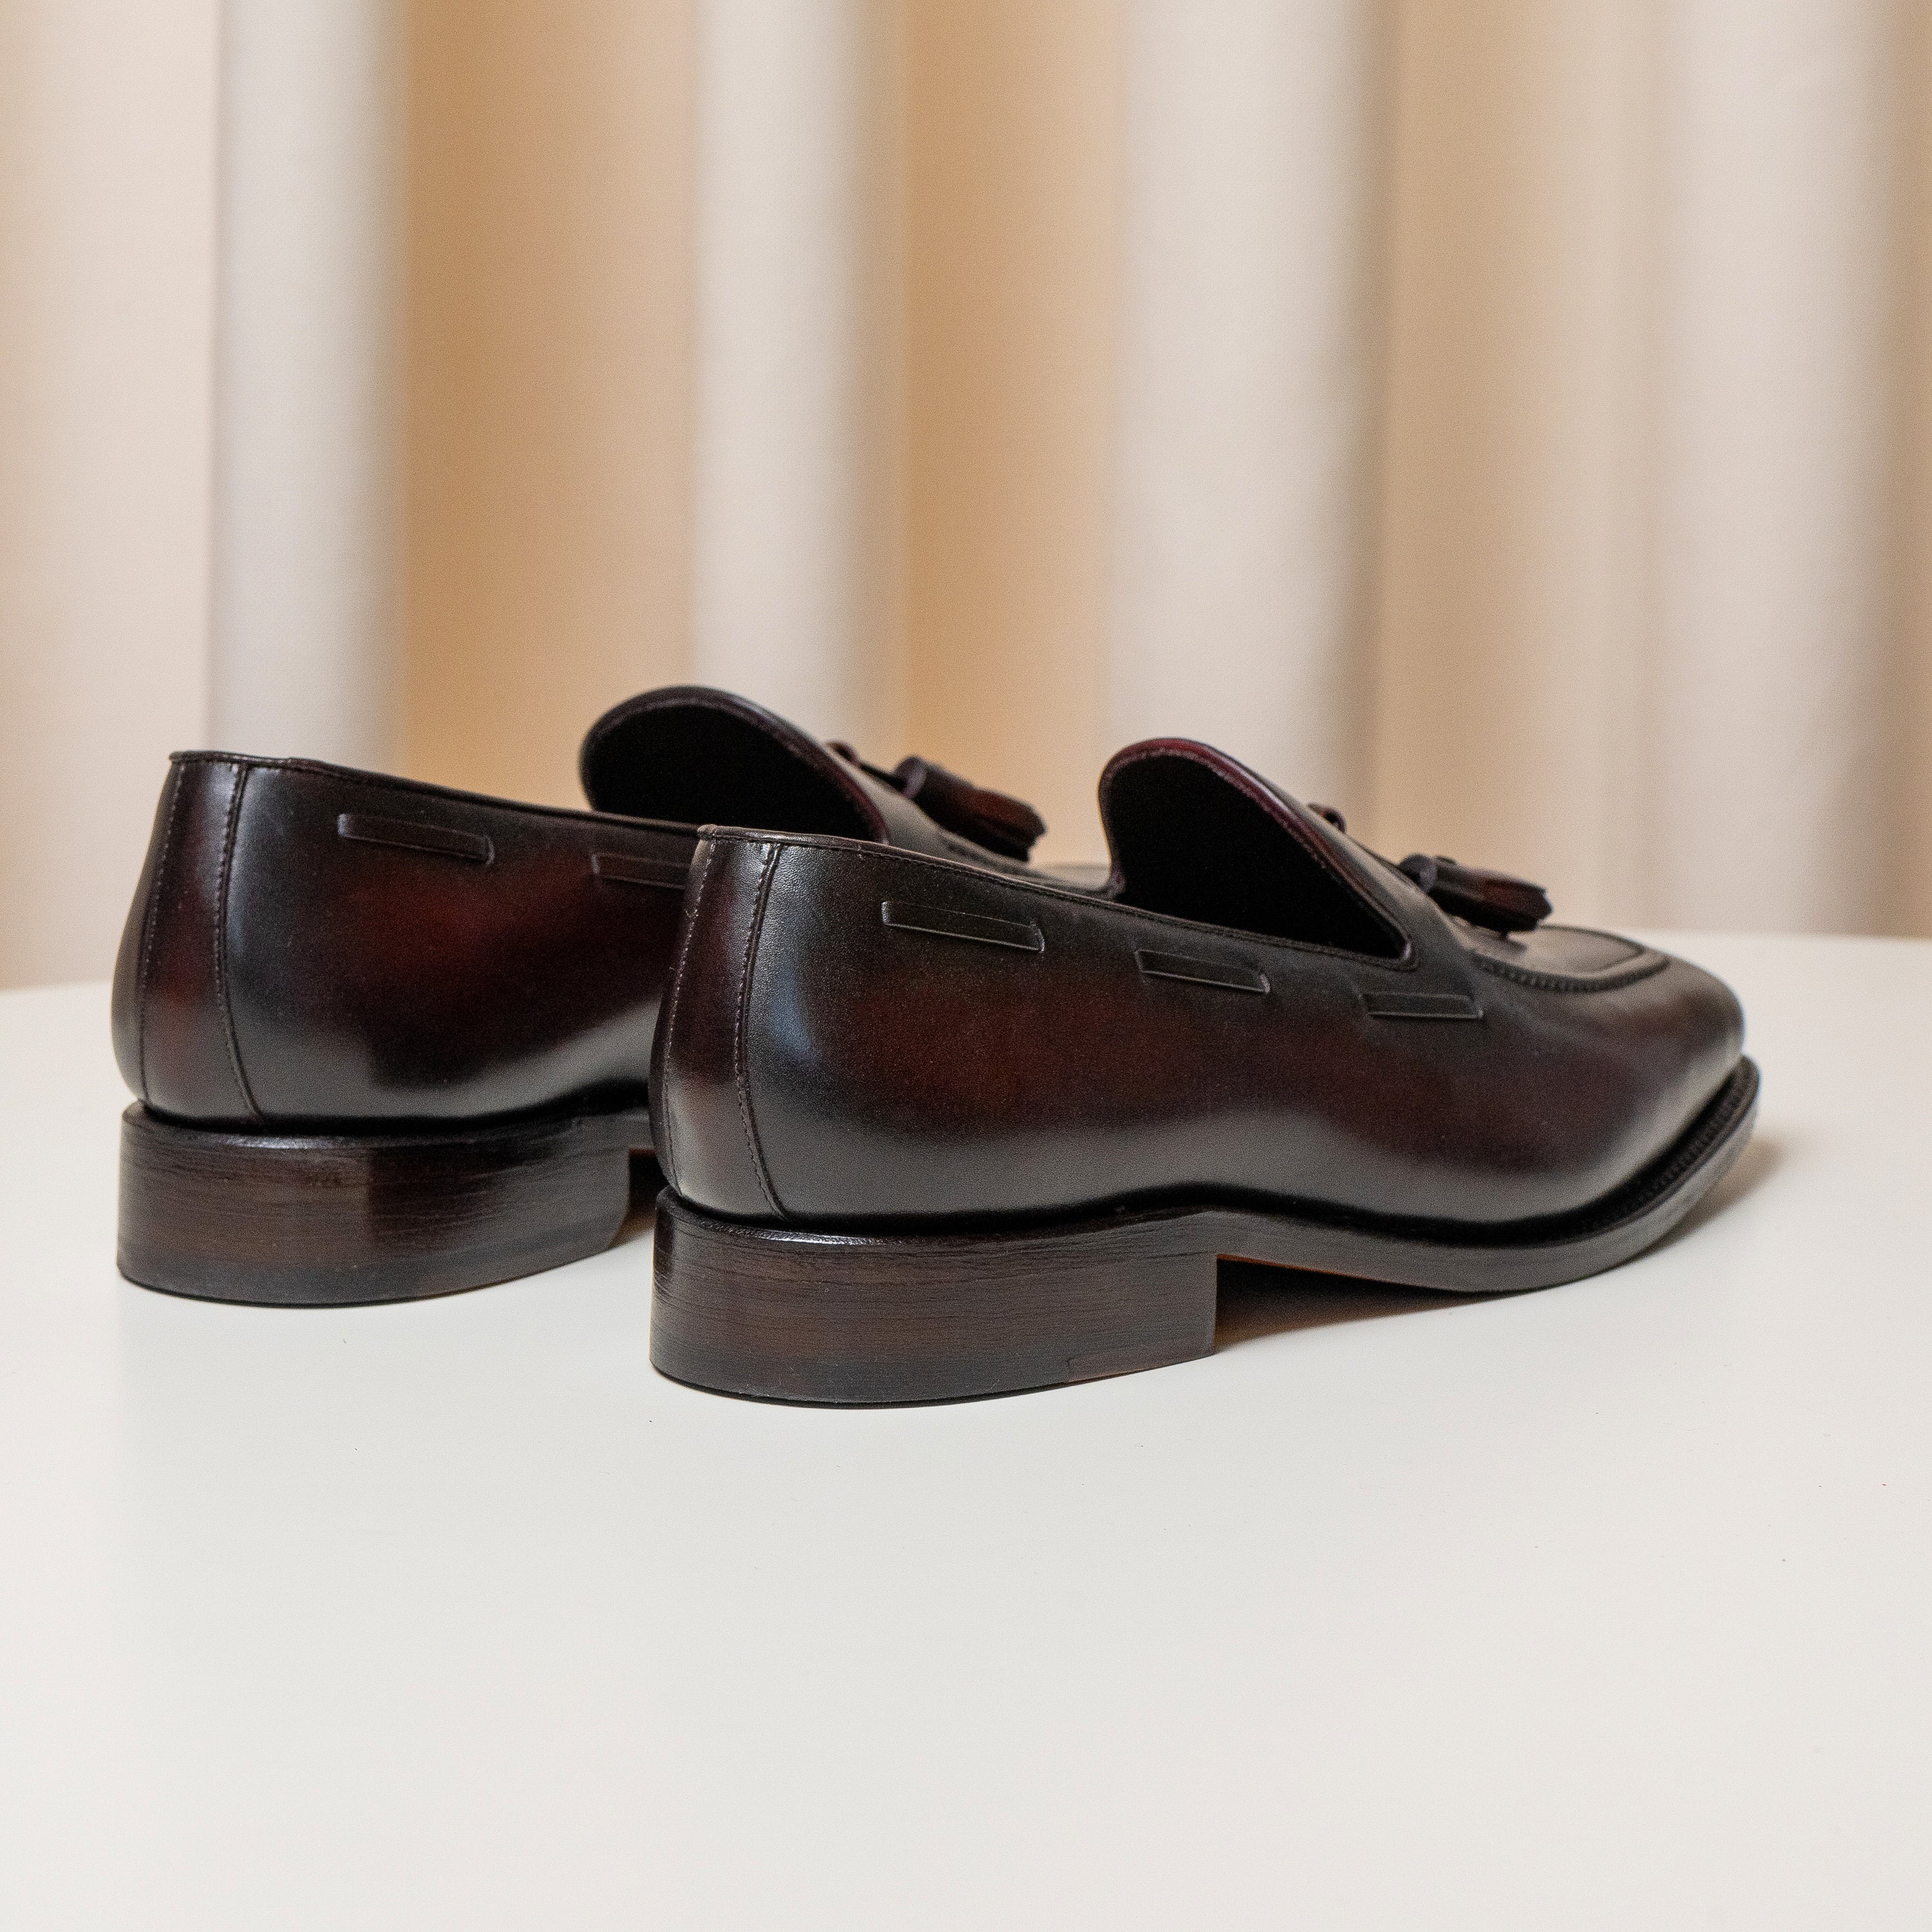 Loafers Chestbrown Consiglieri